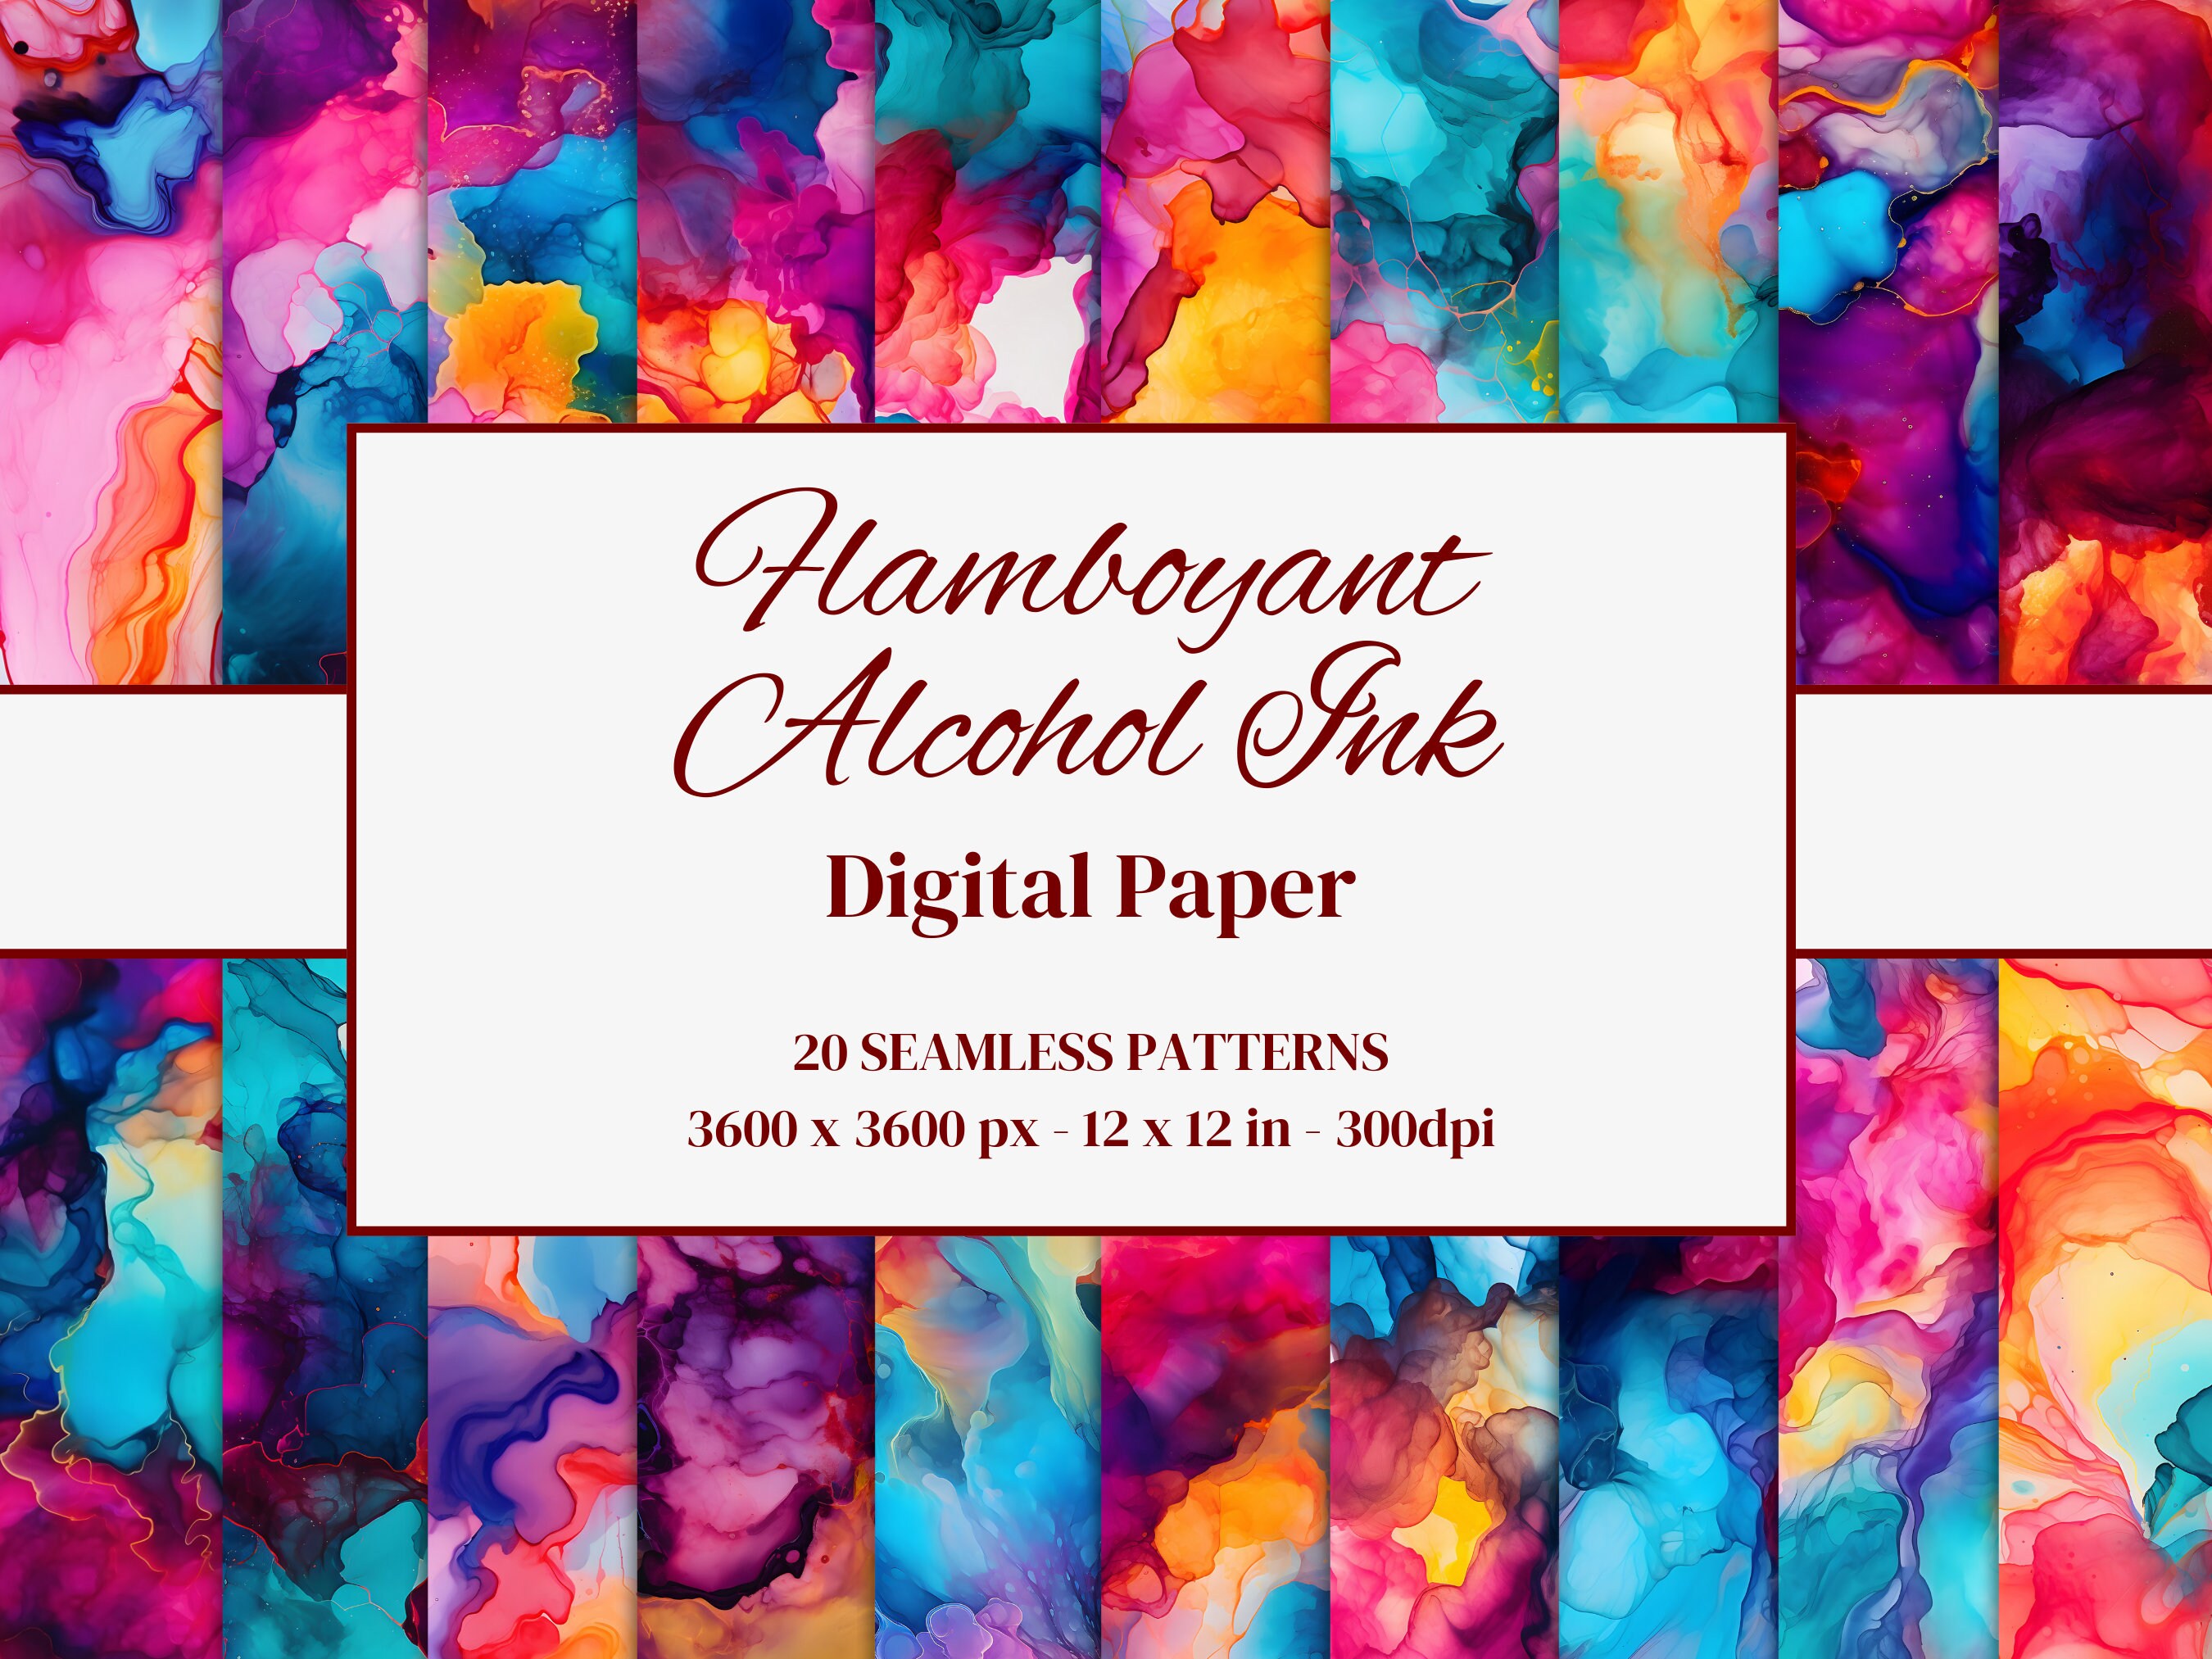 Alcohol Ink Colorful Paper Set-instant Download, Rainbow Colors